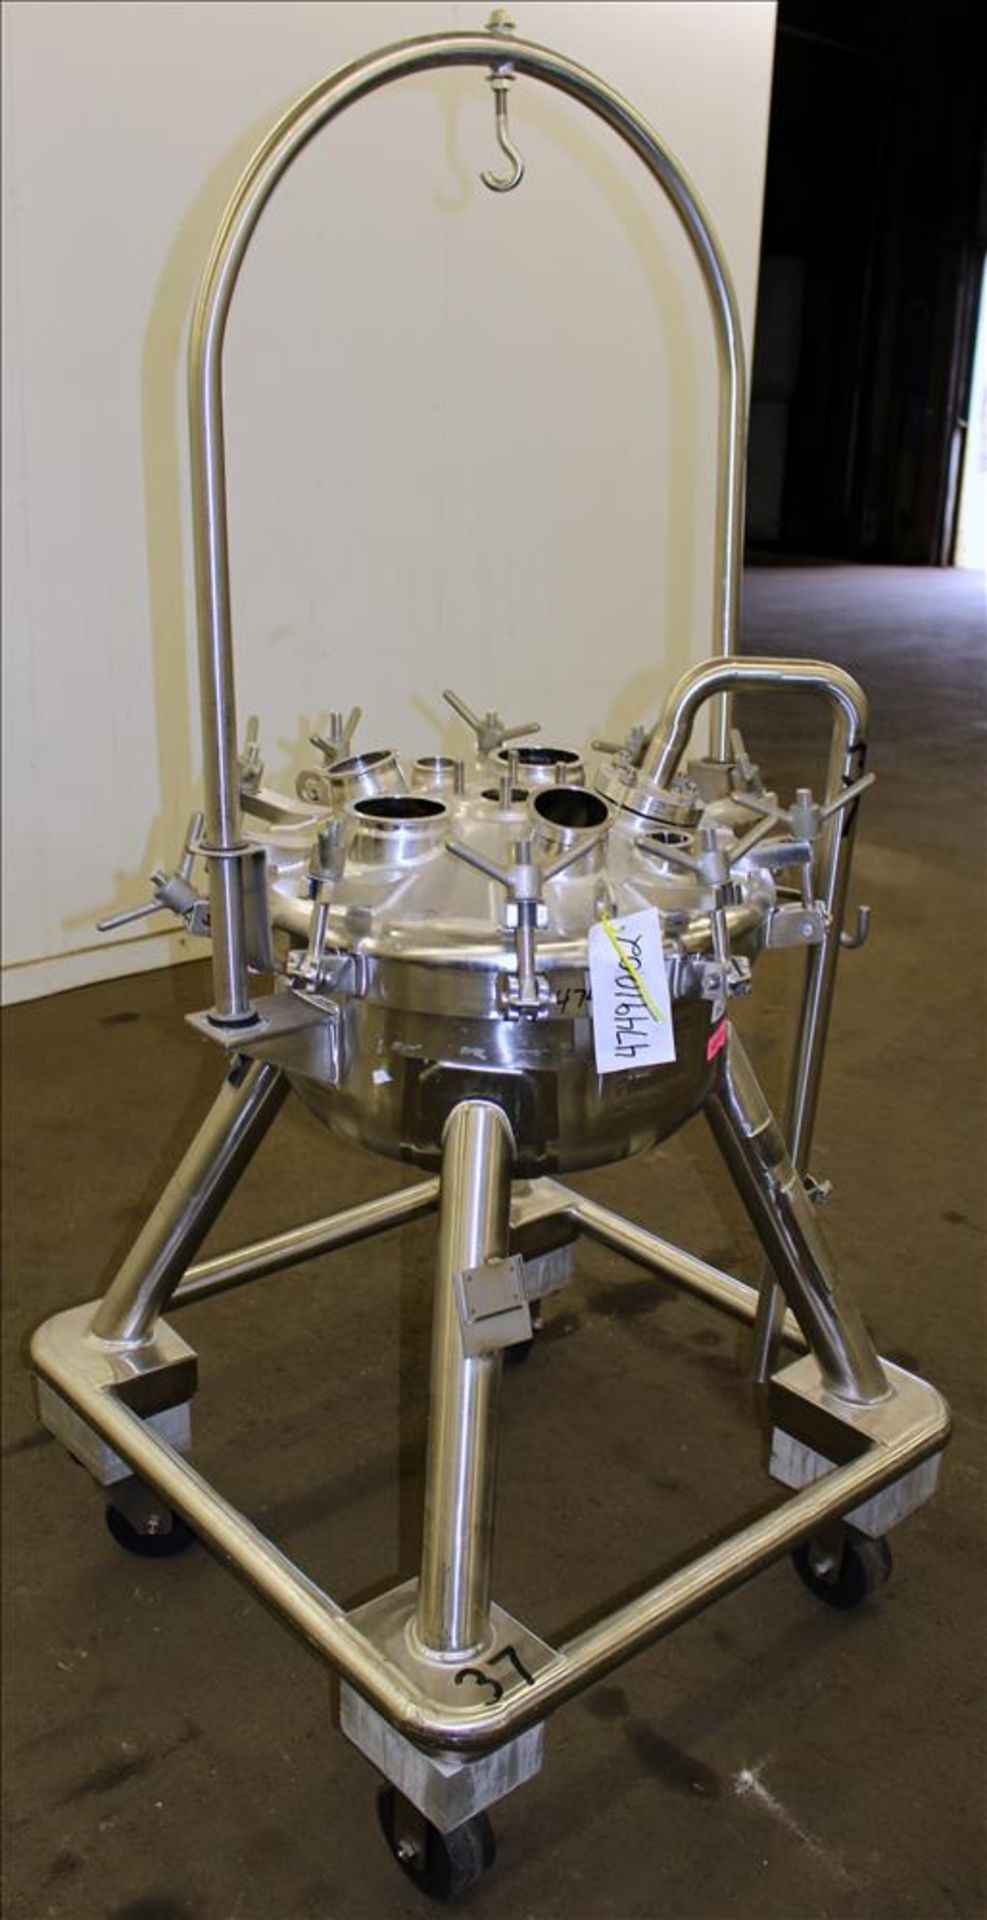 Used- Mueller Pressure Tank, Approximate 40 Liter (10.5 Gallon), 316L Stainless Steel, Vertical - Image 5 of 13